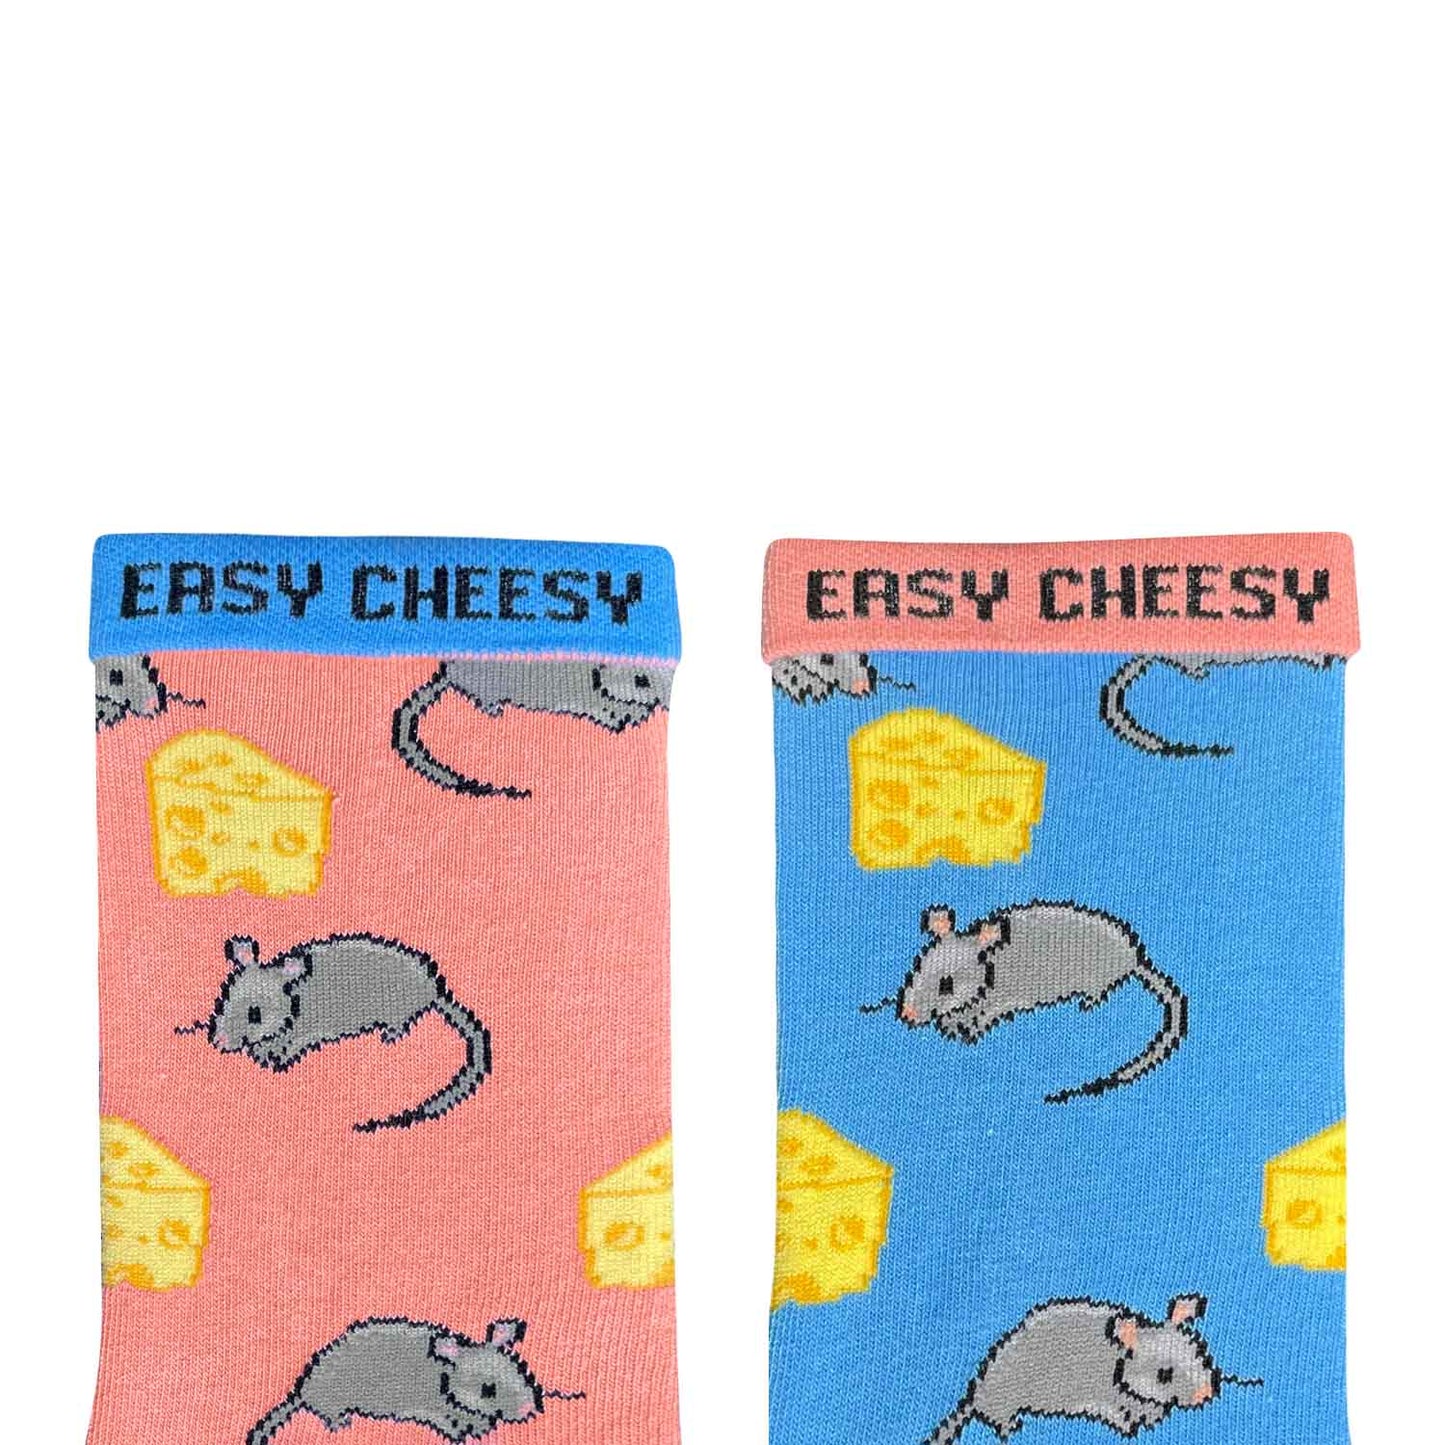 Mouse & Cheese